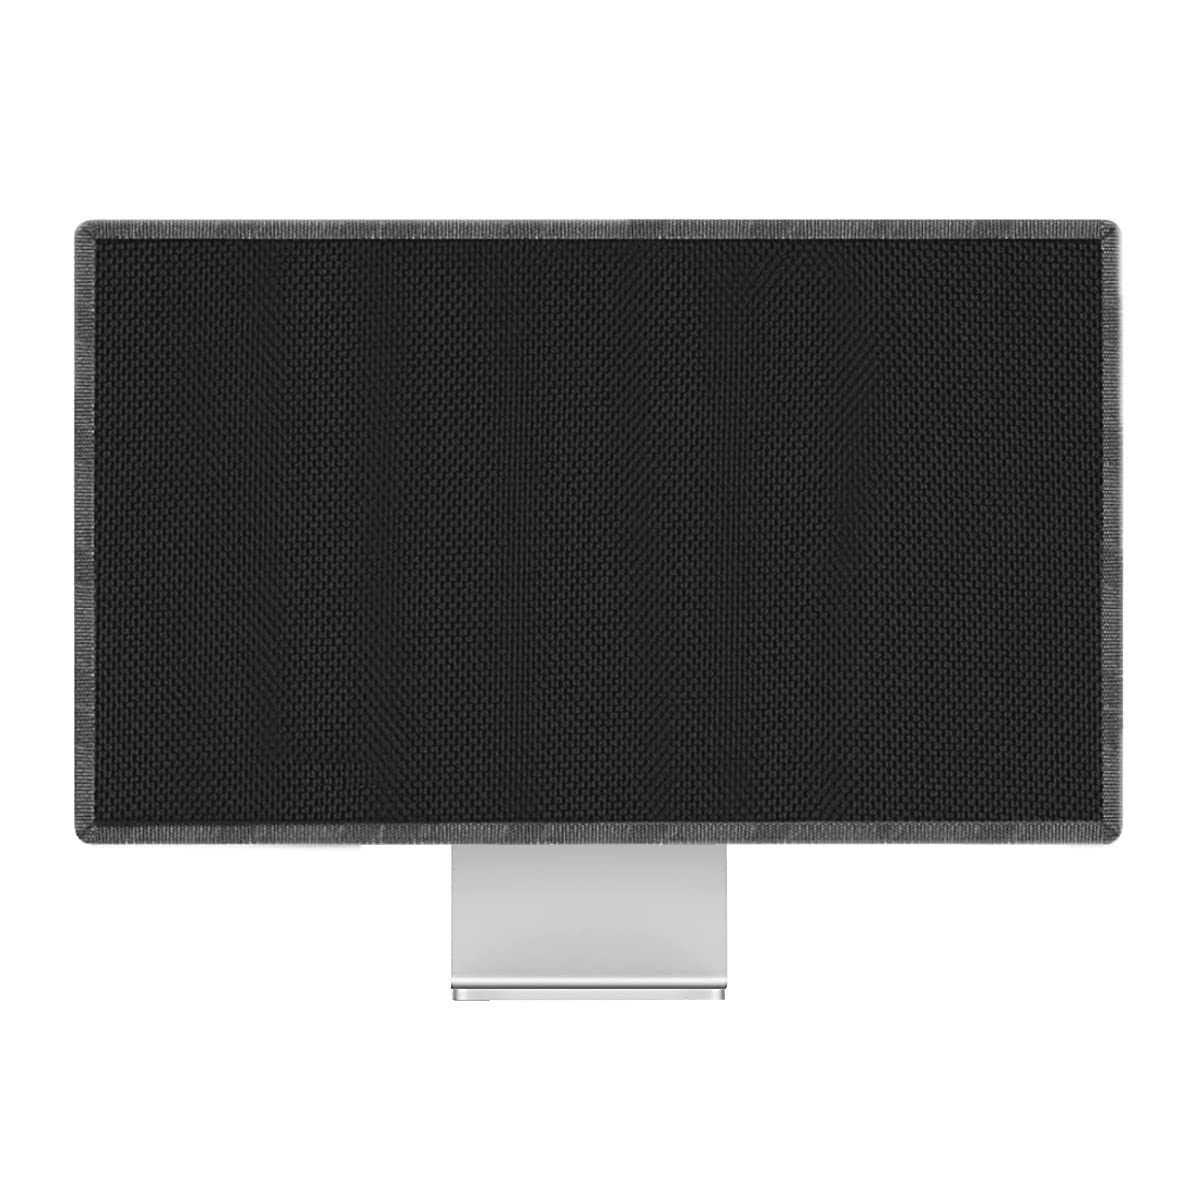 PalaP Super Premium Dust Proof Monitor Cover for Apple iMac All in ONE Desktop 27 inches (Black)